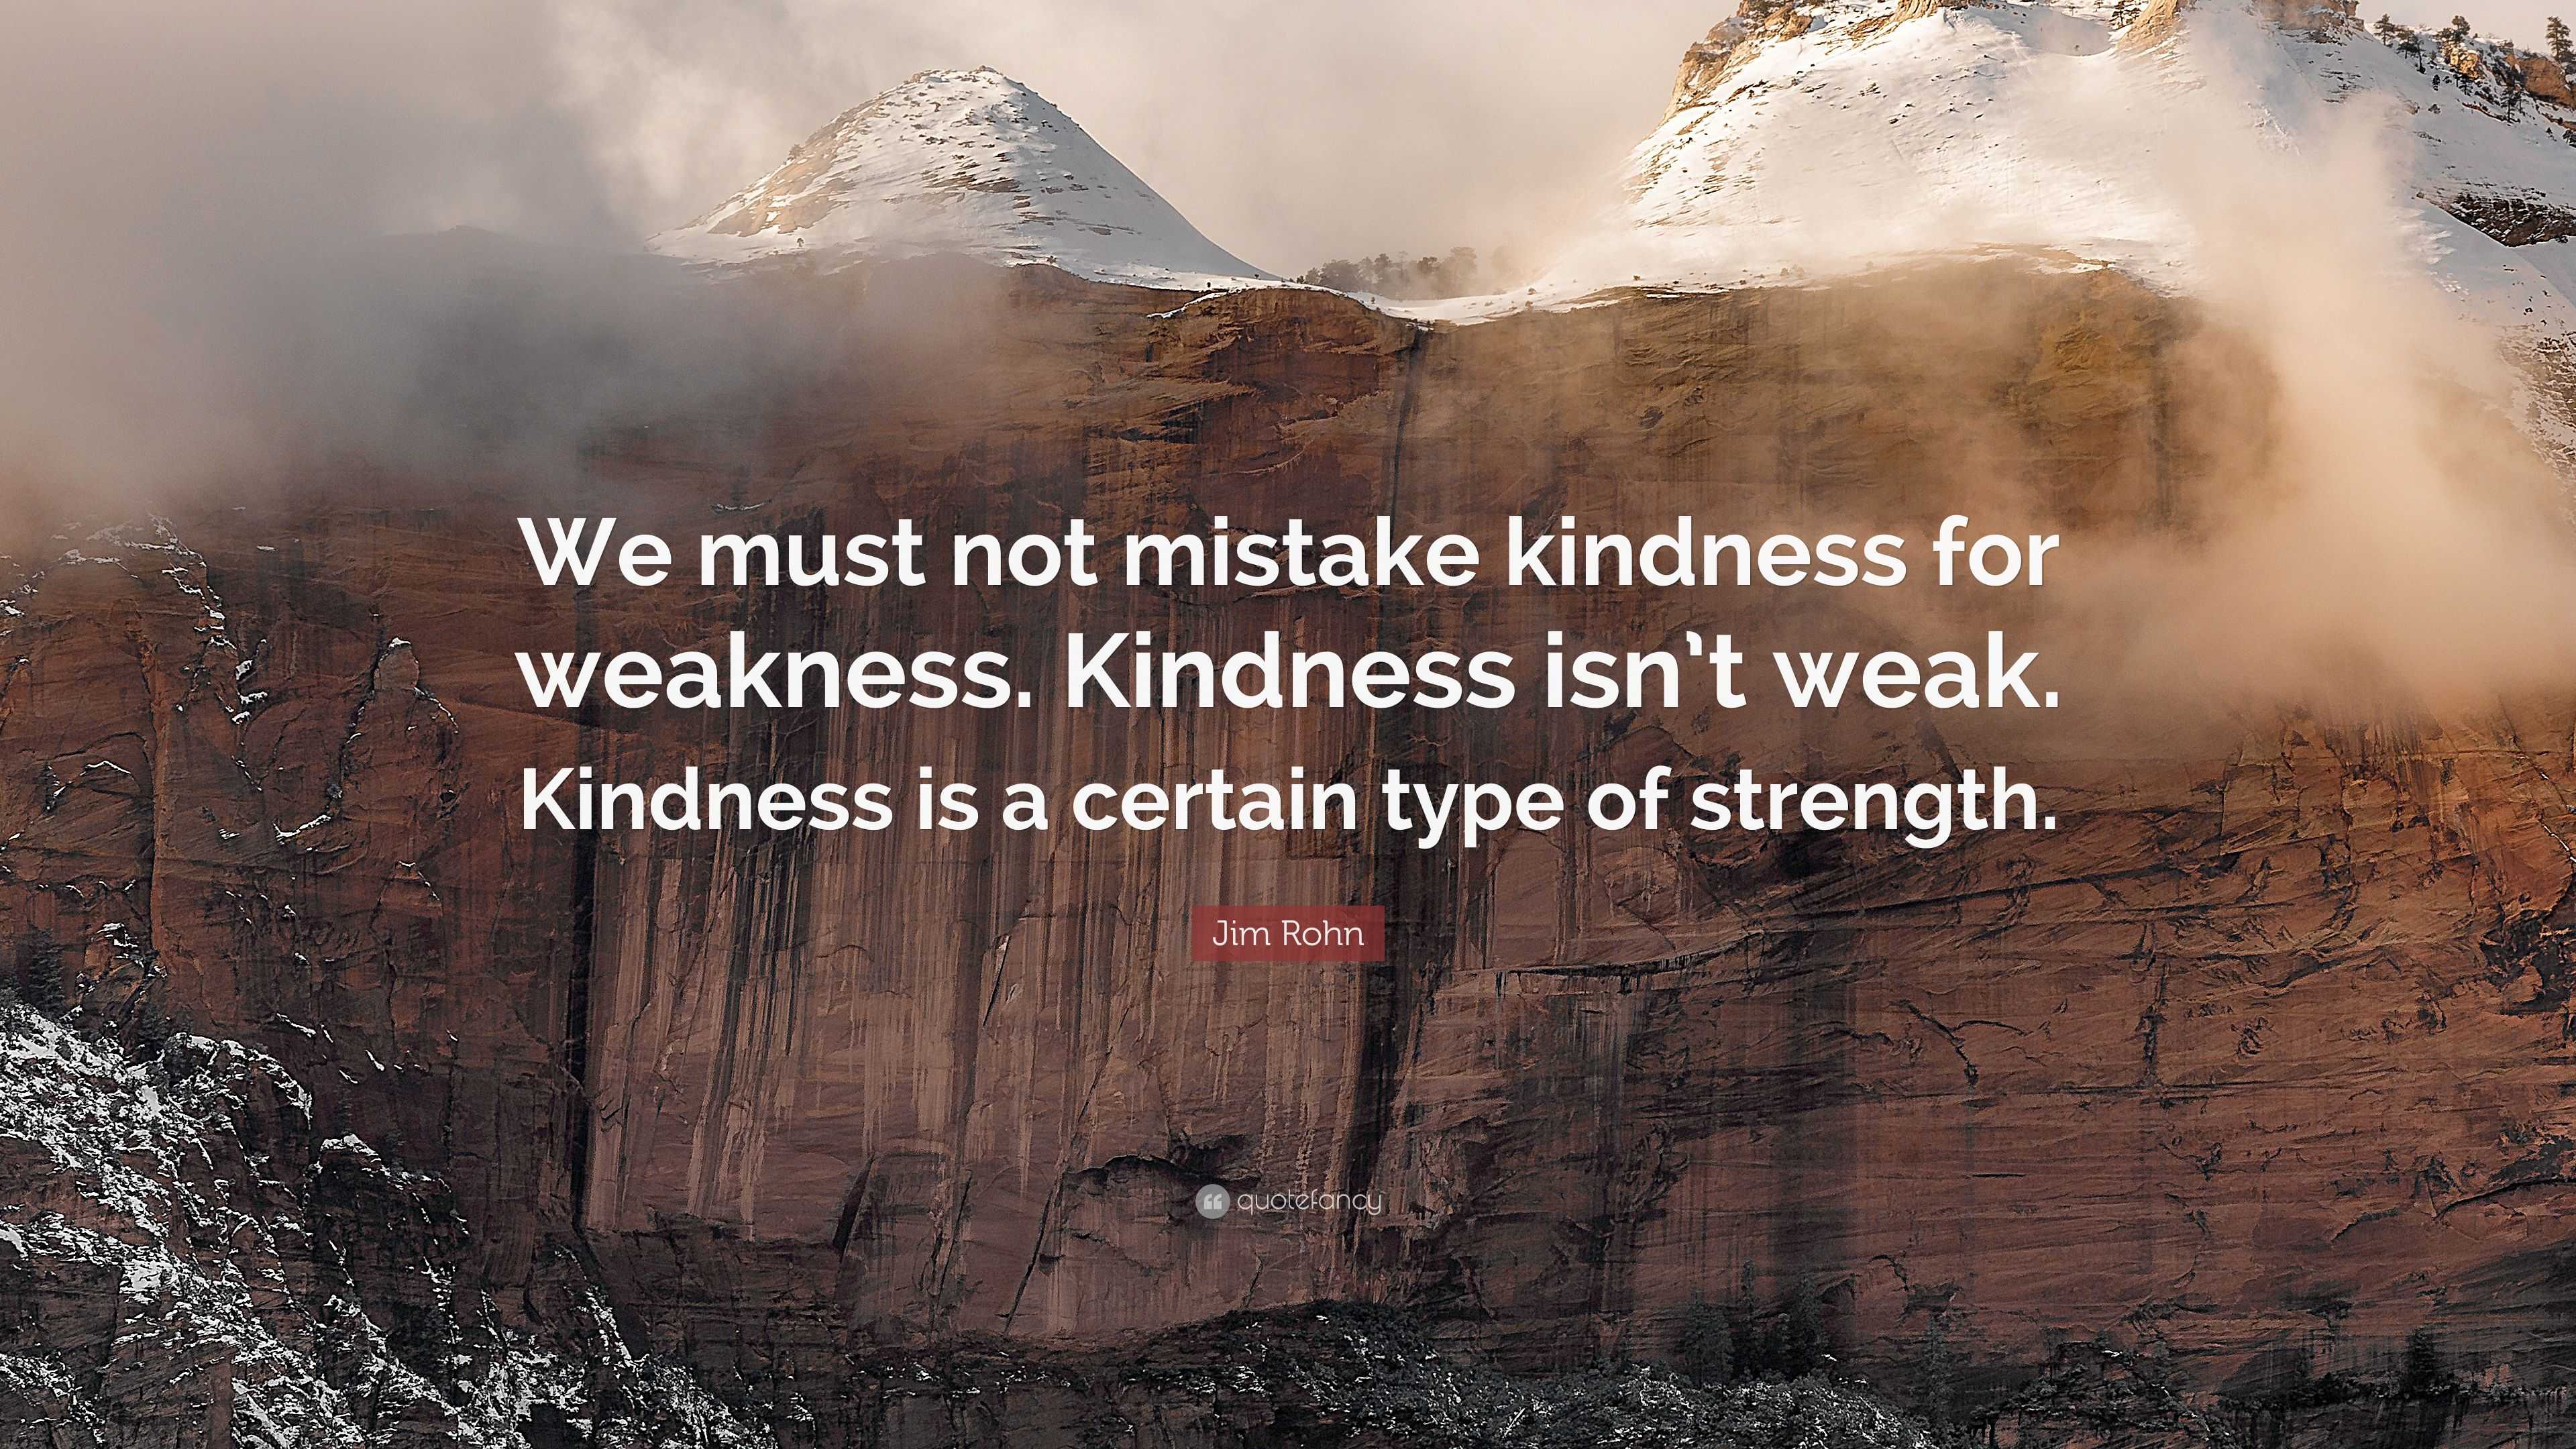 is kindness weakness or strength